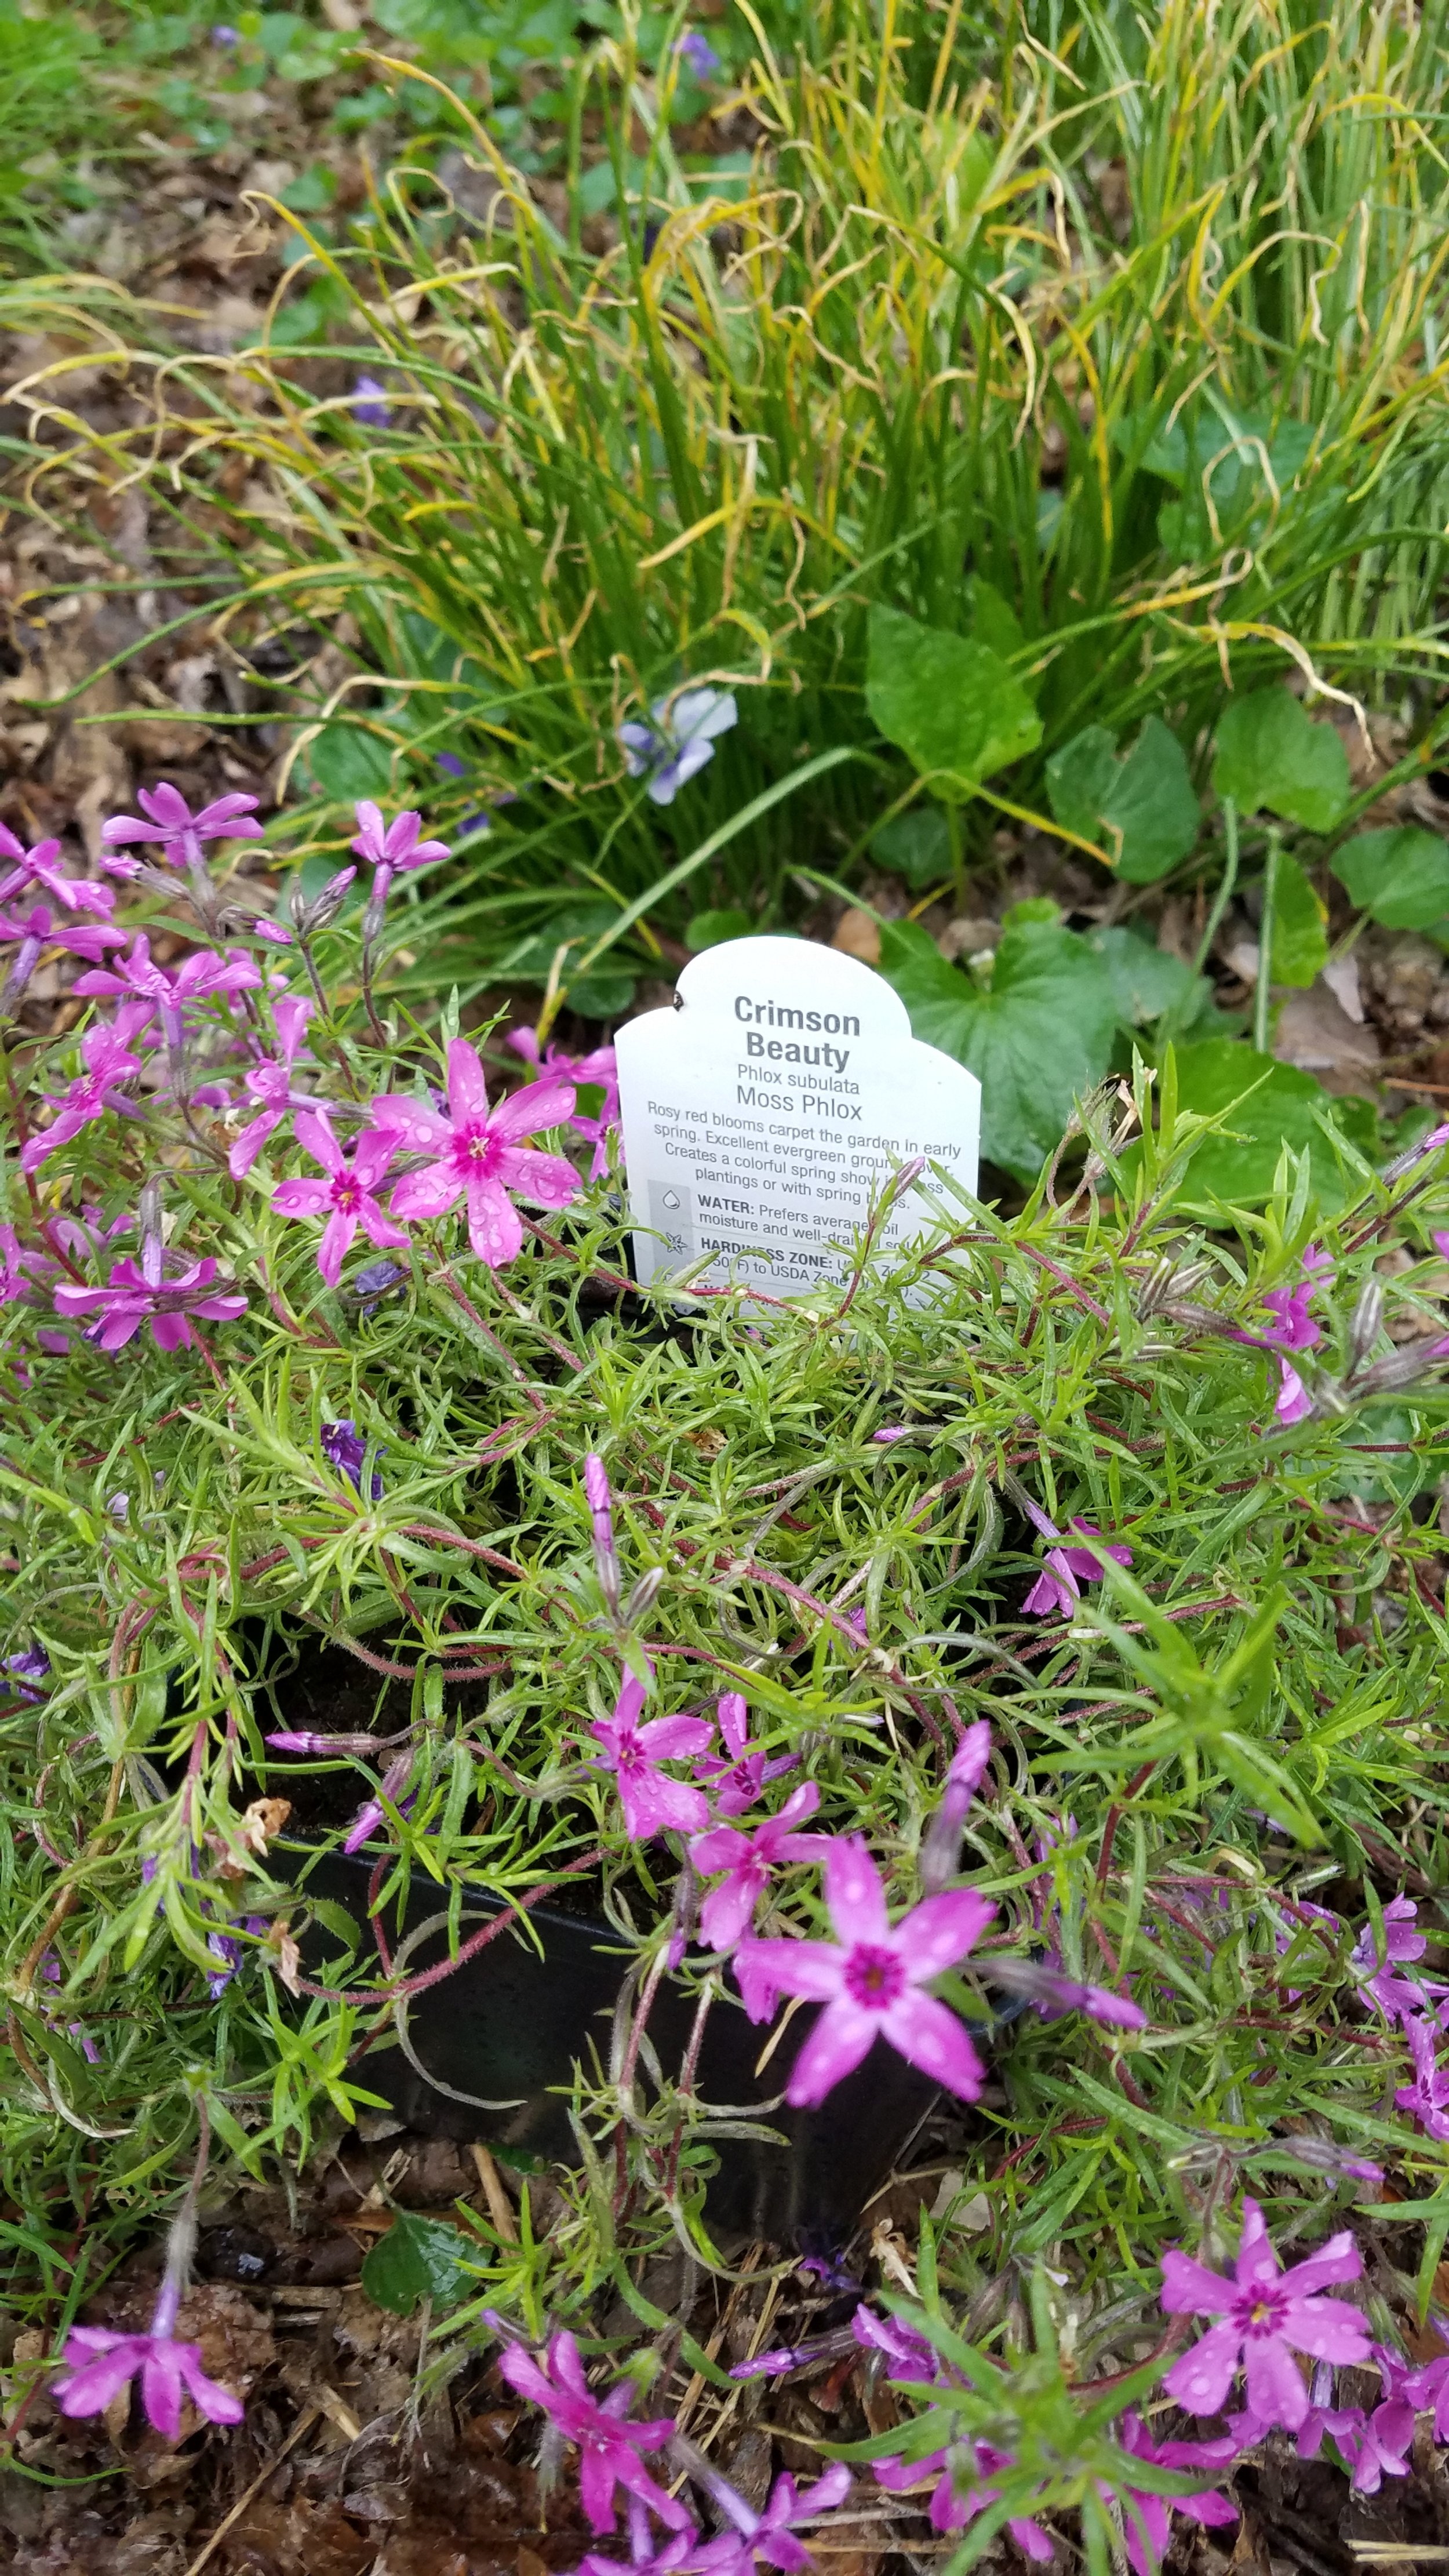 Phlox Will Grow In Shade, But May Not Flower (local nursery tip)